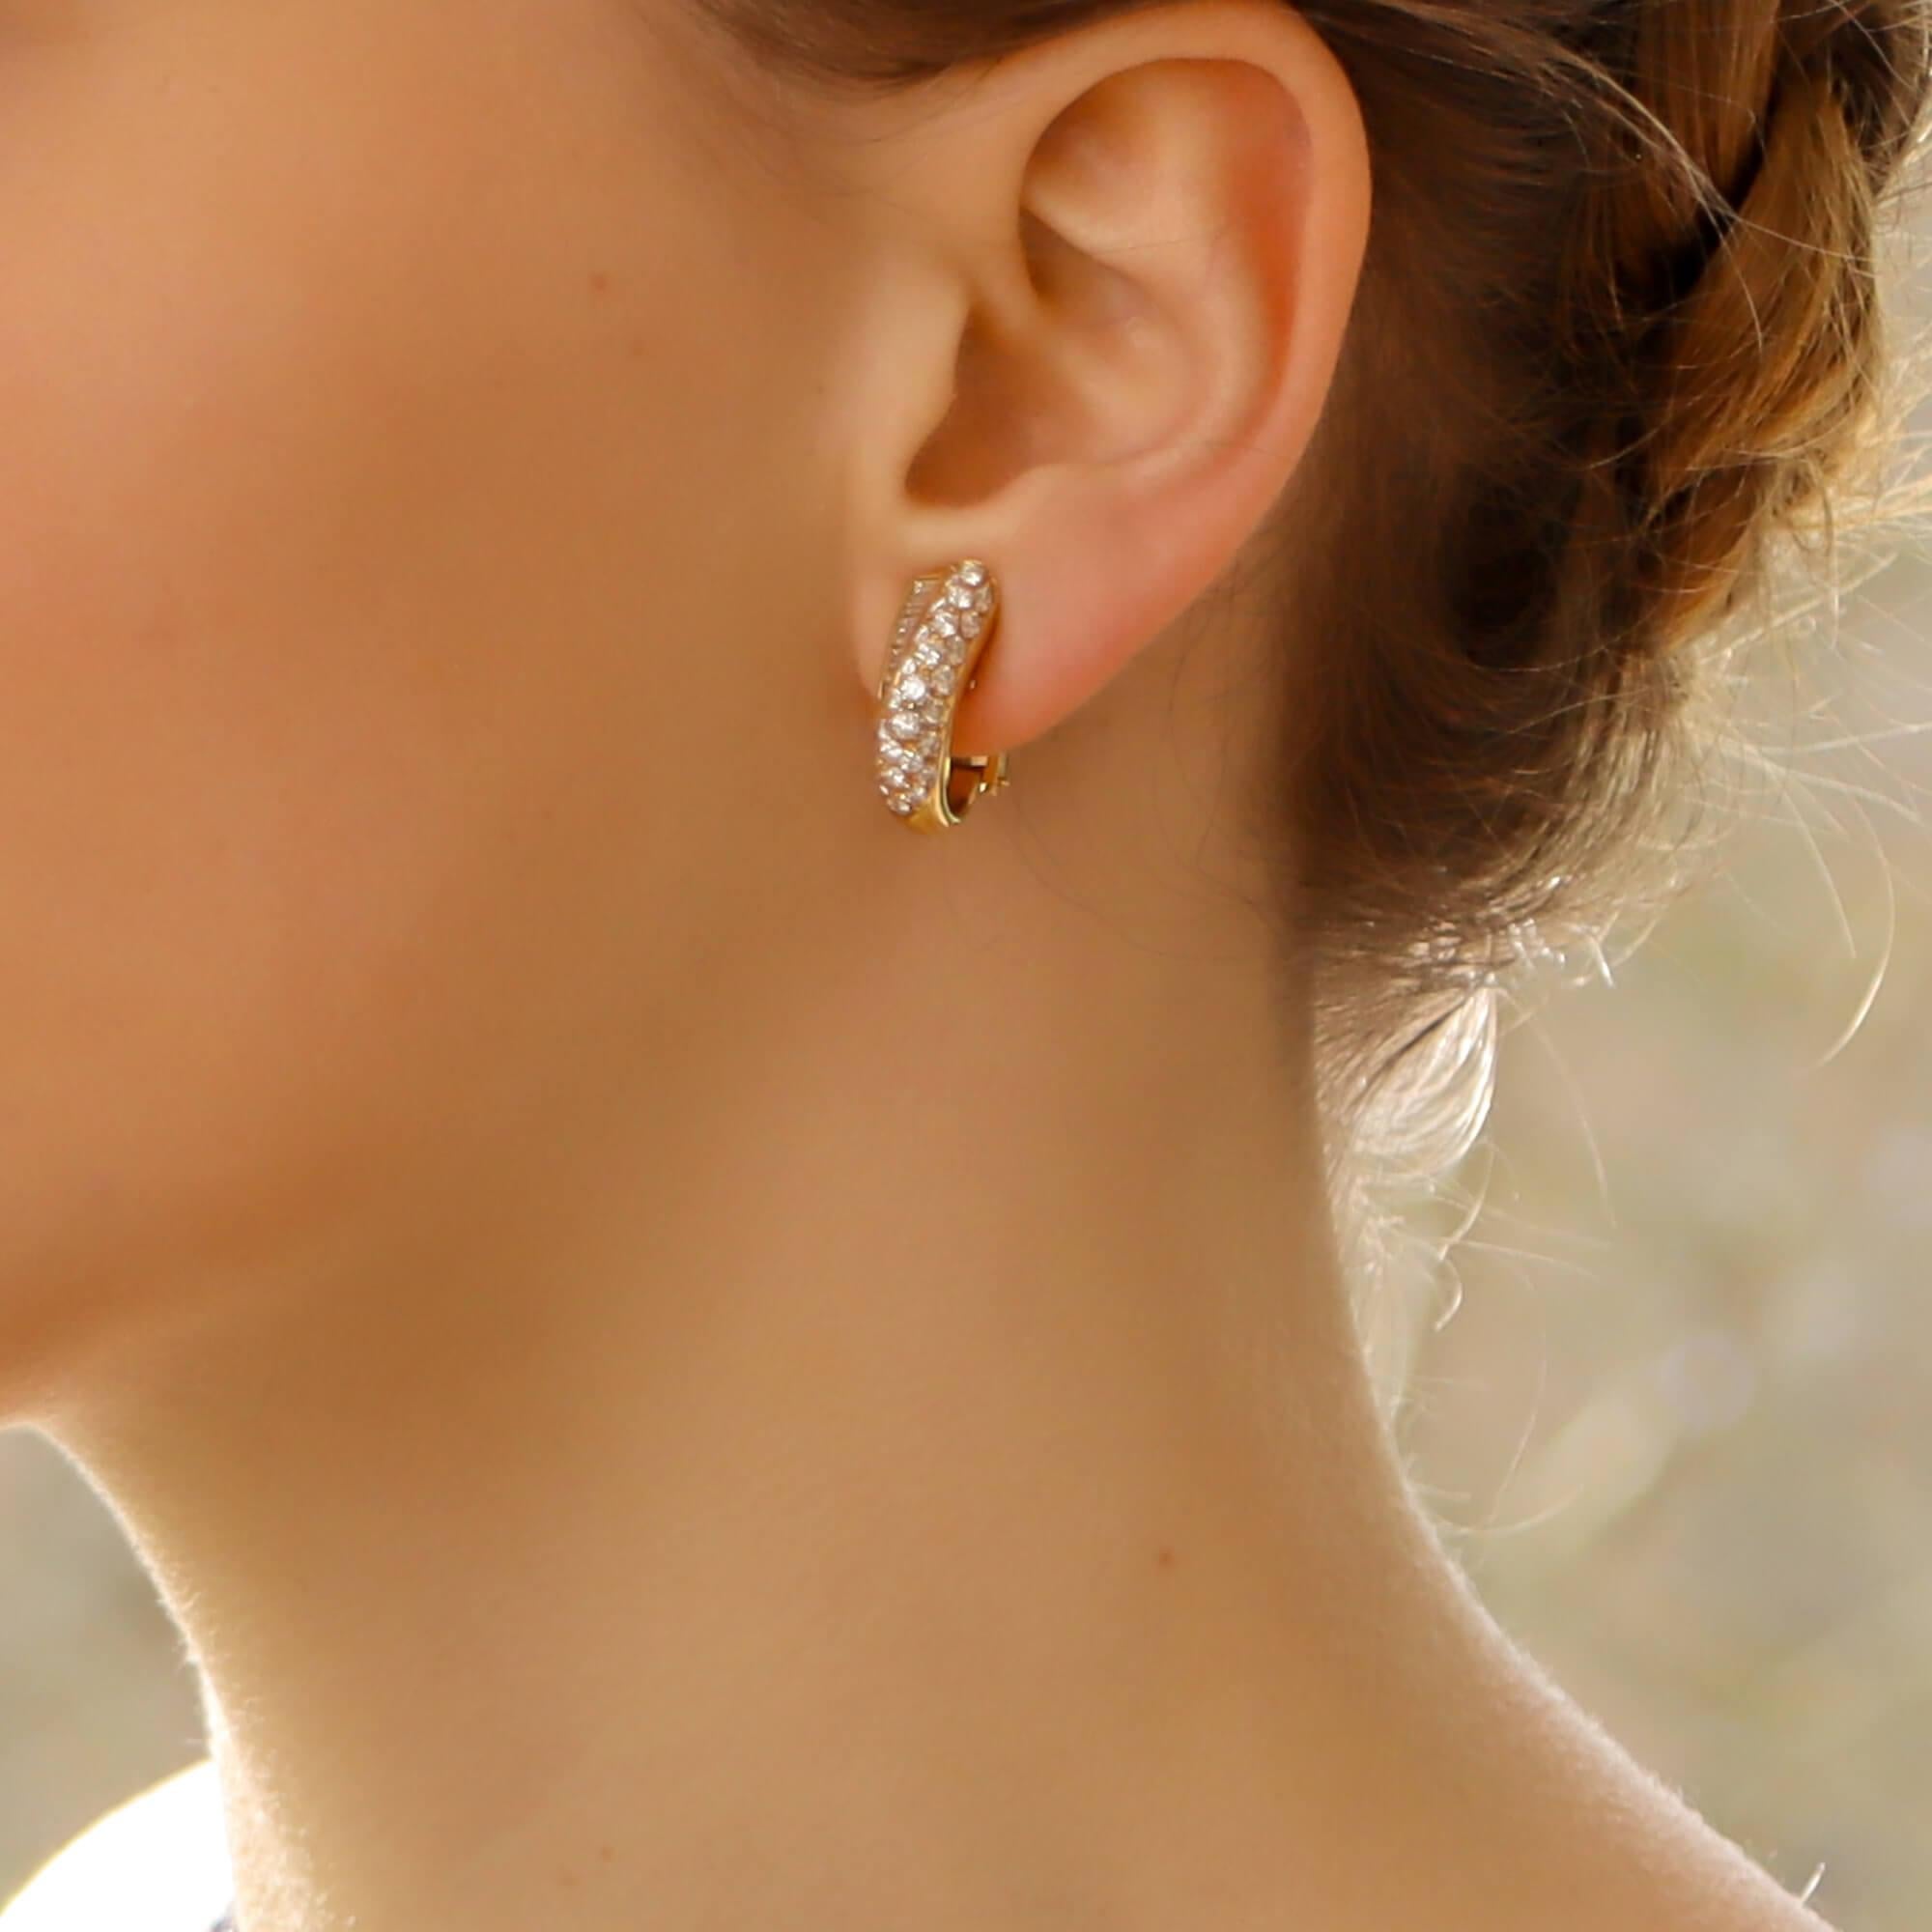 A pair of Boucheron diamond earrings in 18-karat yellow gold where each earring is designed as an elongated bombe-shaped hoop pave-set throughout with round brilliant-cut diamonds, accented with channel-set baguette-cut diamonds. 
The earrings are